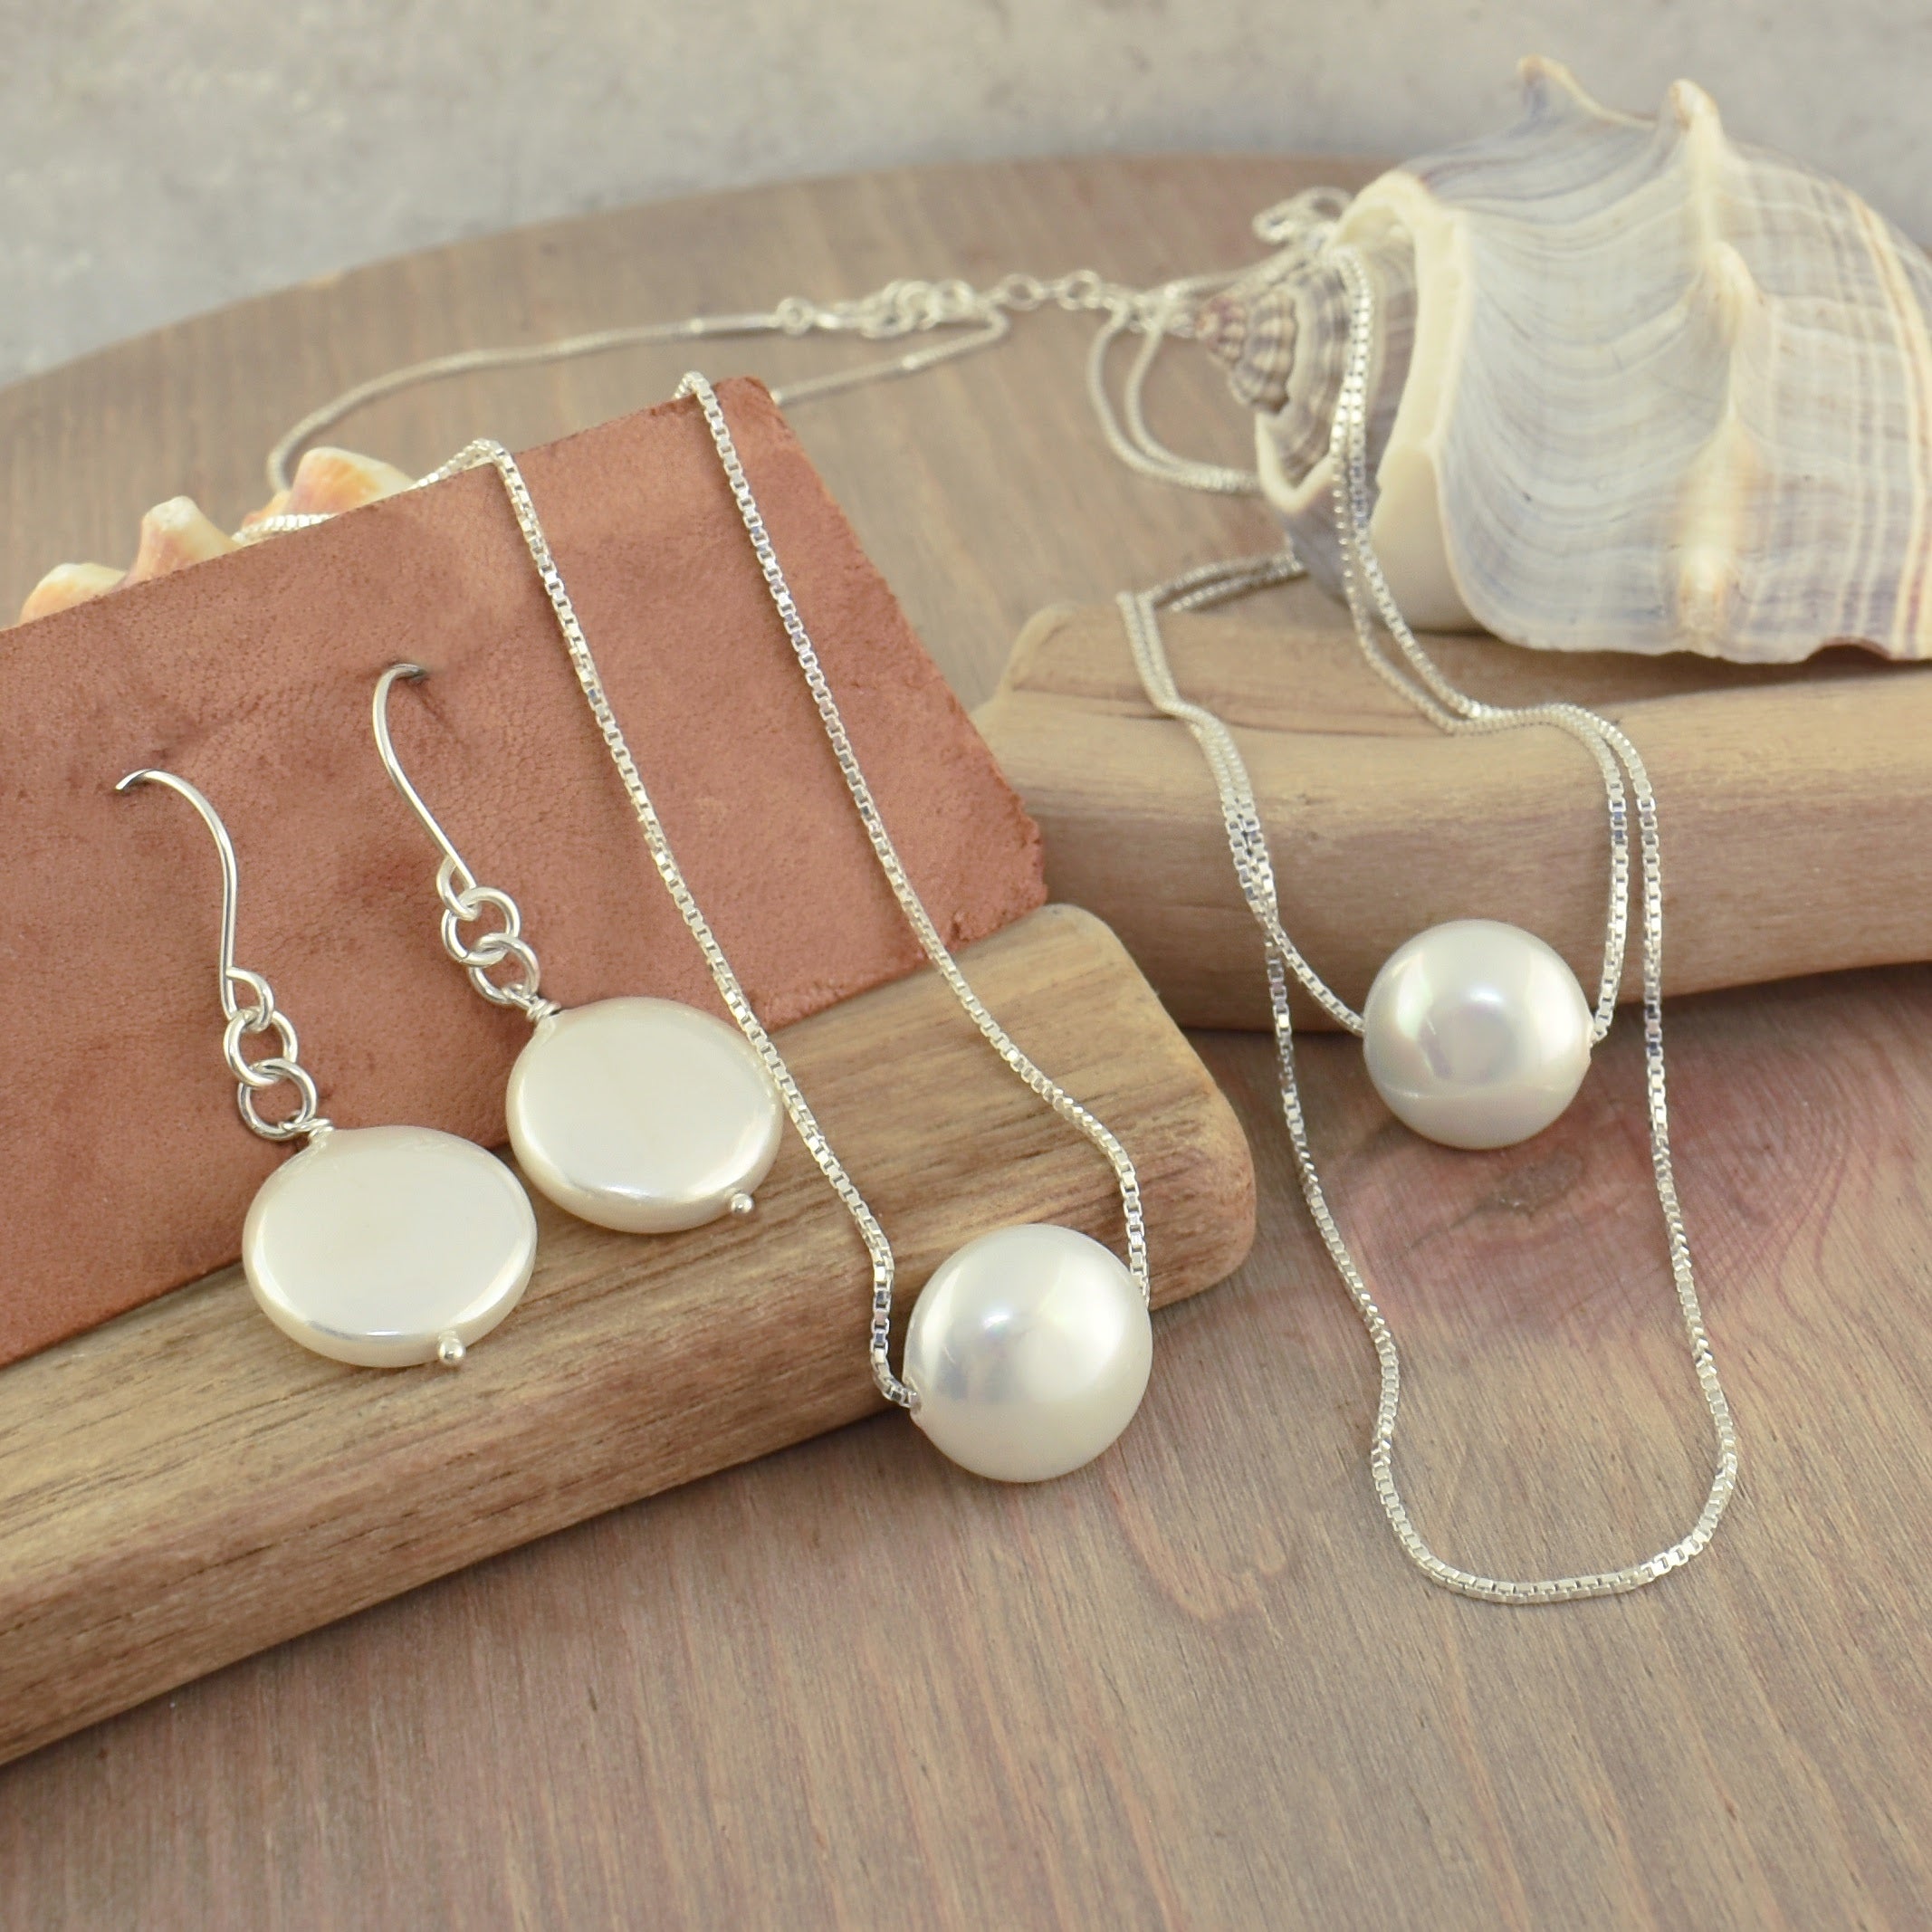 Seaside matching necklace and earring ster in handcrafted sterling silver and faux pearl